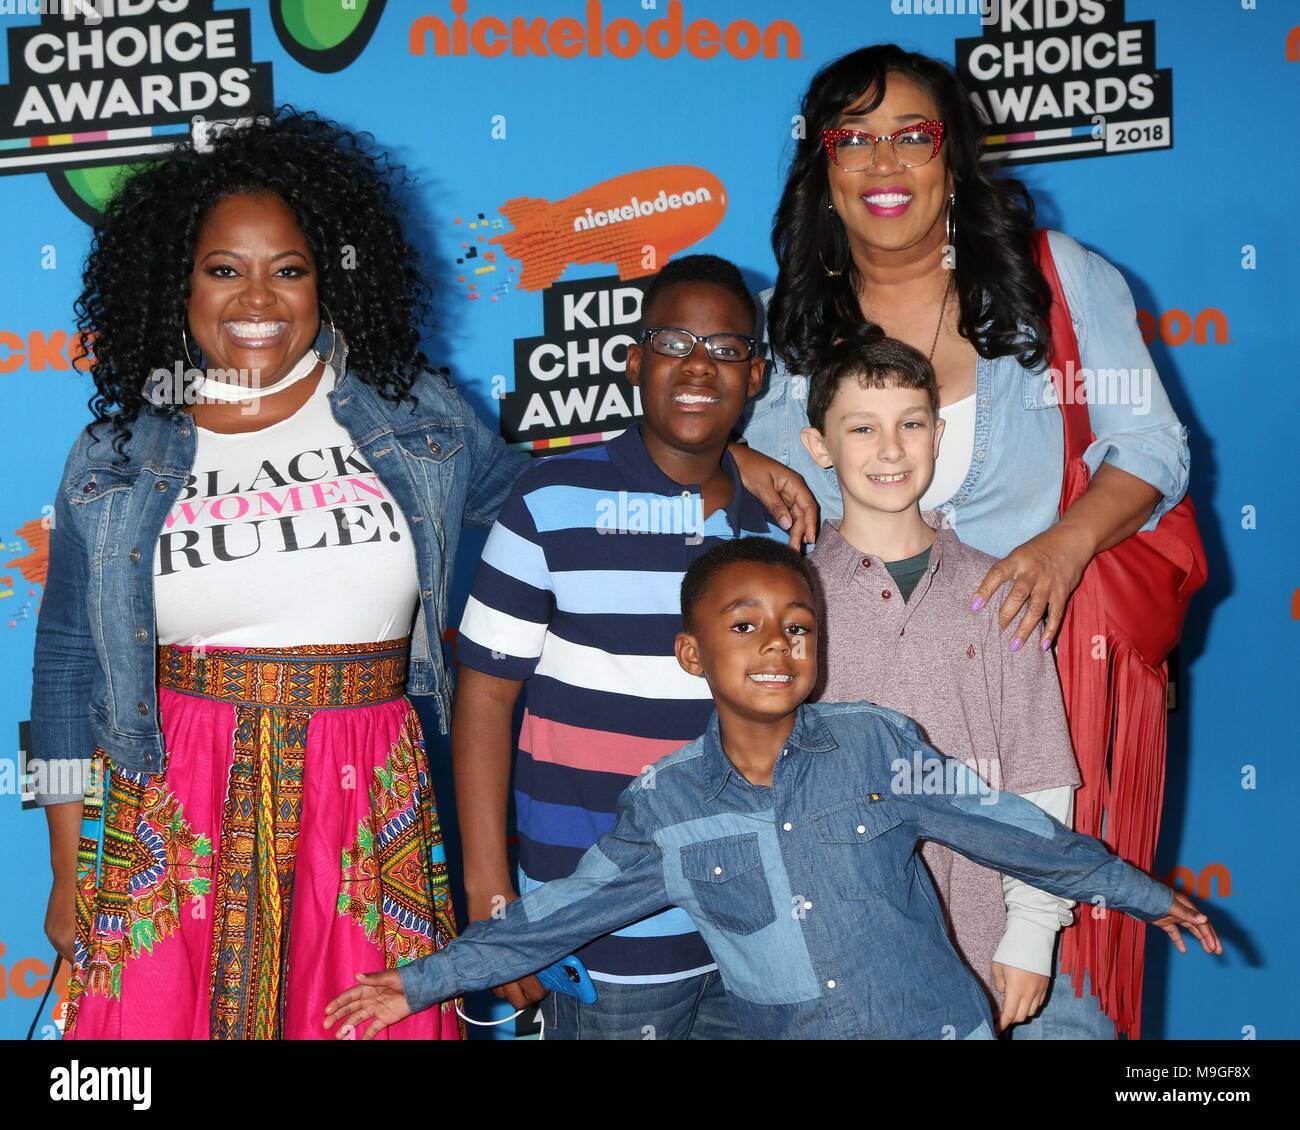 Inglewood, CA. 24th Mar, 2018. Sherri Shepherd, Jeffrey Tarpley, Guest, Joshua Kaleb Whitley, Kym Whitley at arrivals for Nickelodeon's 2018 Kids' Choice Awards - Part 2, The Forum, Inglewood, CA March 24, 2018. Credit: Priscilla Grant/Everett Collection/Alamy Live News Stock Photo